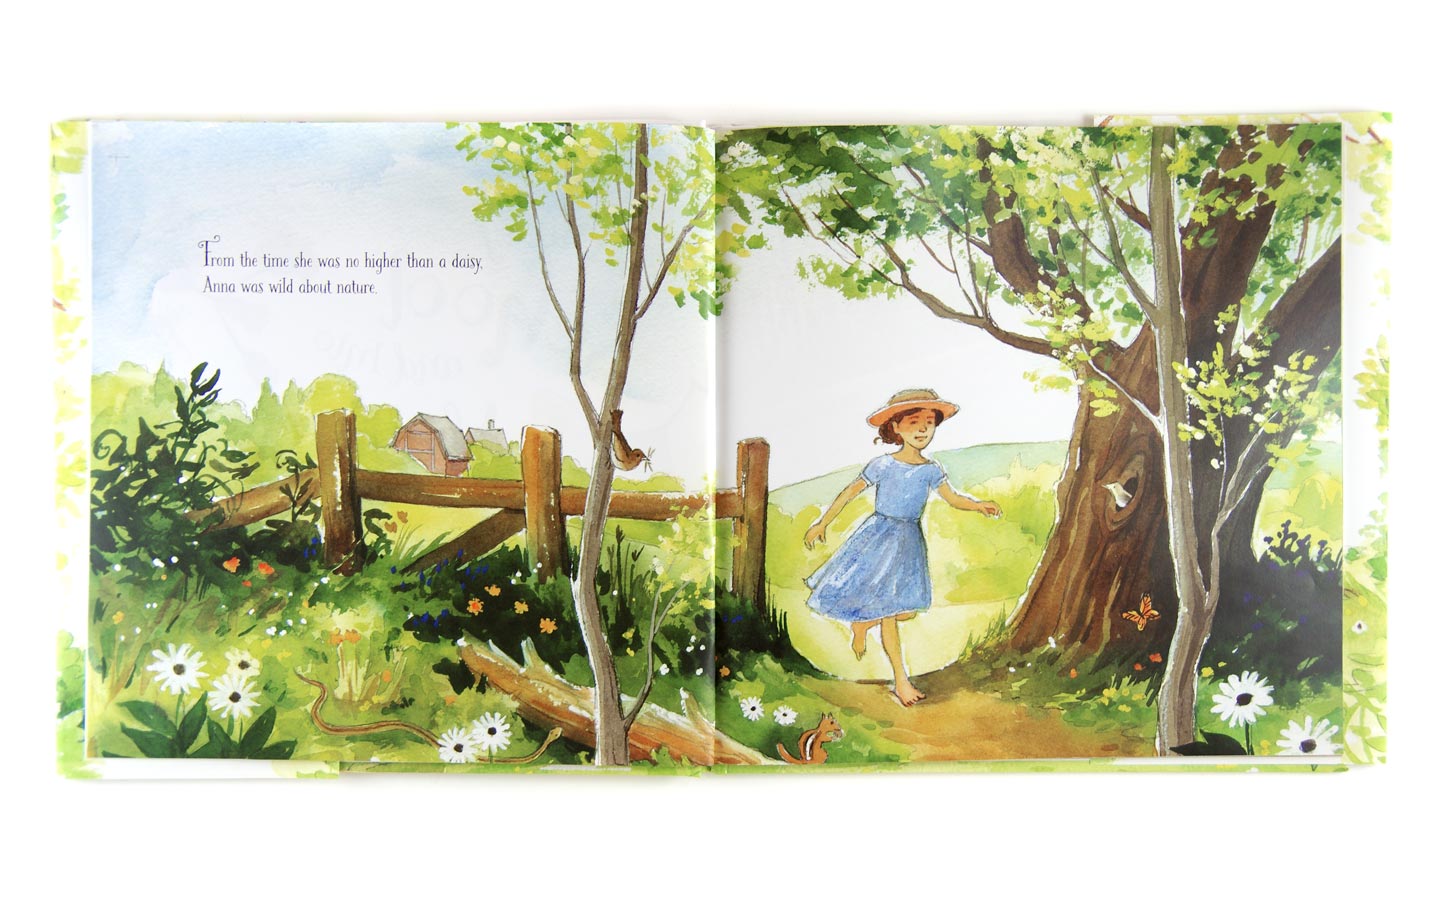 Photograph of first pages of Out of School and Into Nature, showing a young girl in a blue dress and straw hat running barefoot along a dirt path through the countryside on a sunny day. Details show butterflies, birds, and insects in the foliage.